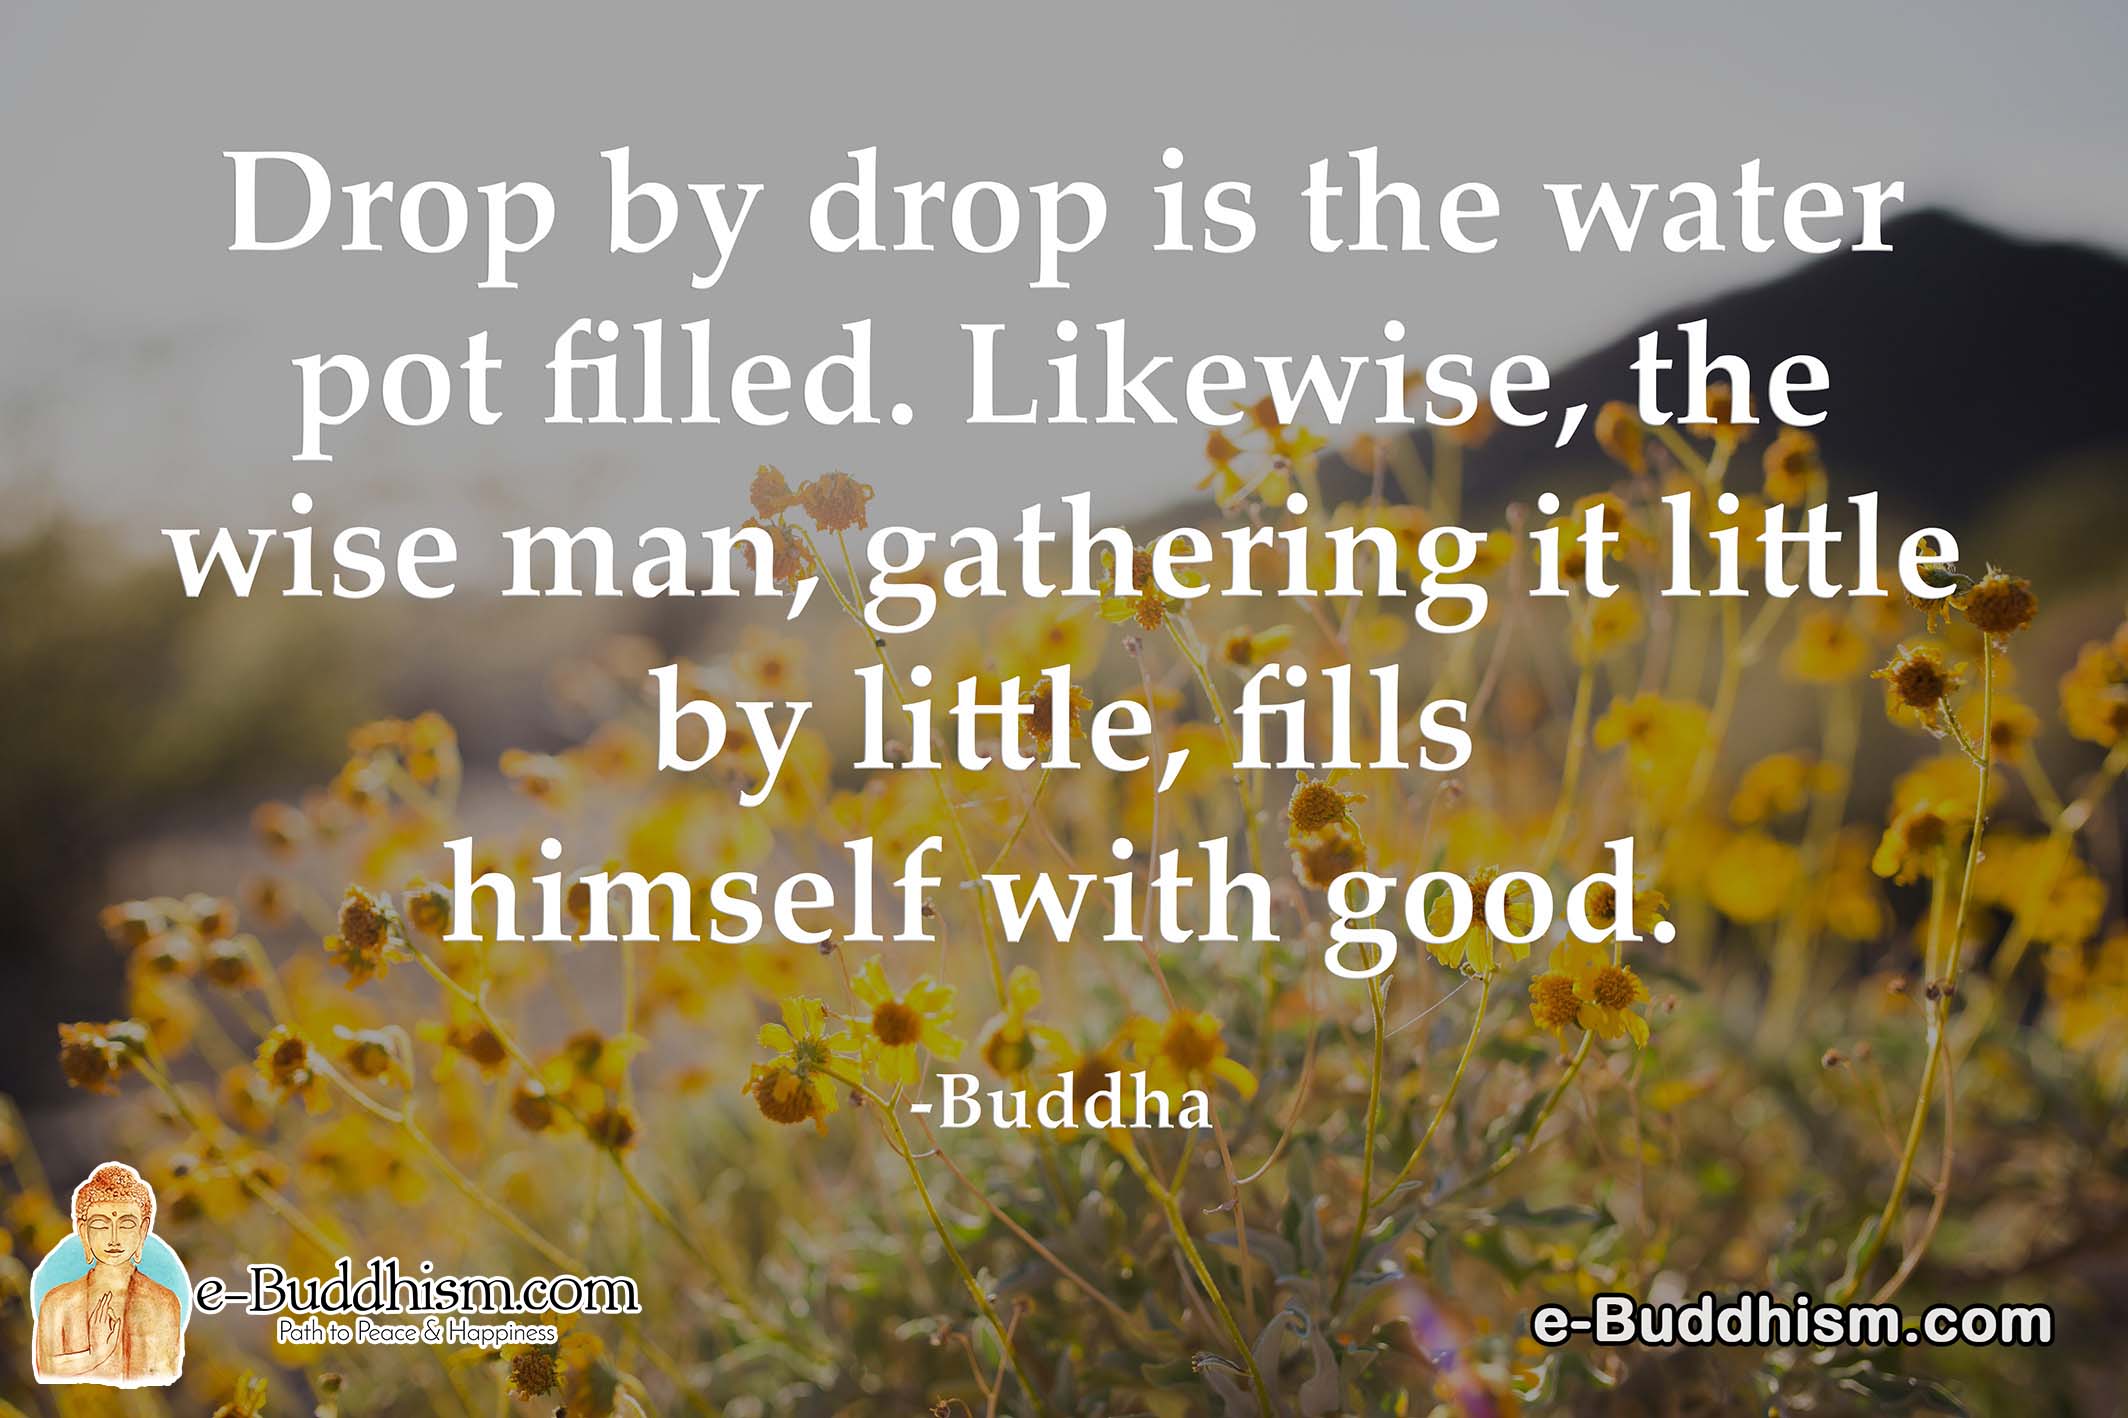 Drop by drop is the water pot filled. Likewise, the wise man, gathering it little by little. fills himself with good. - Buddha